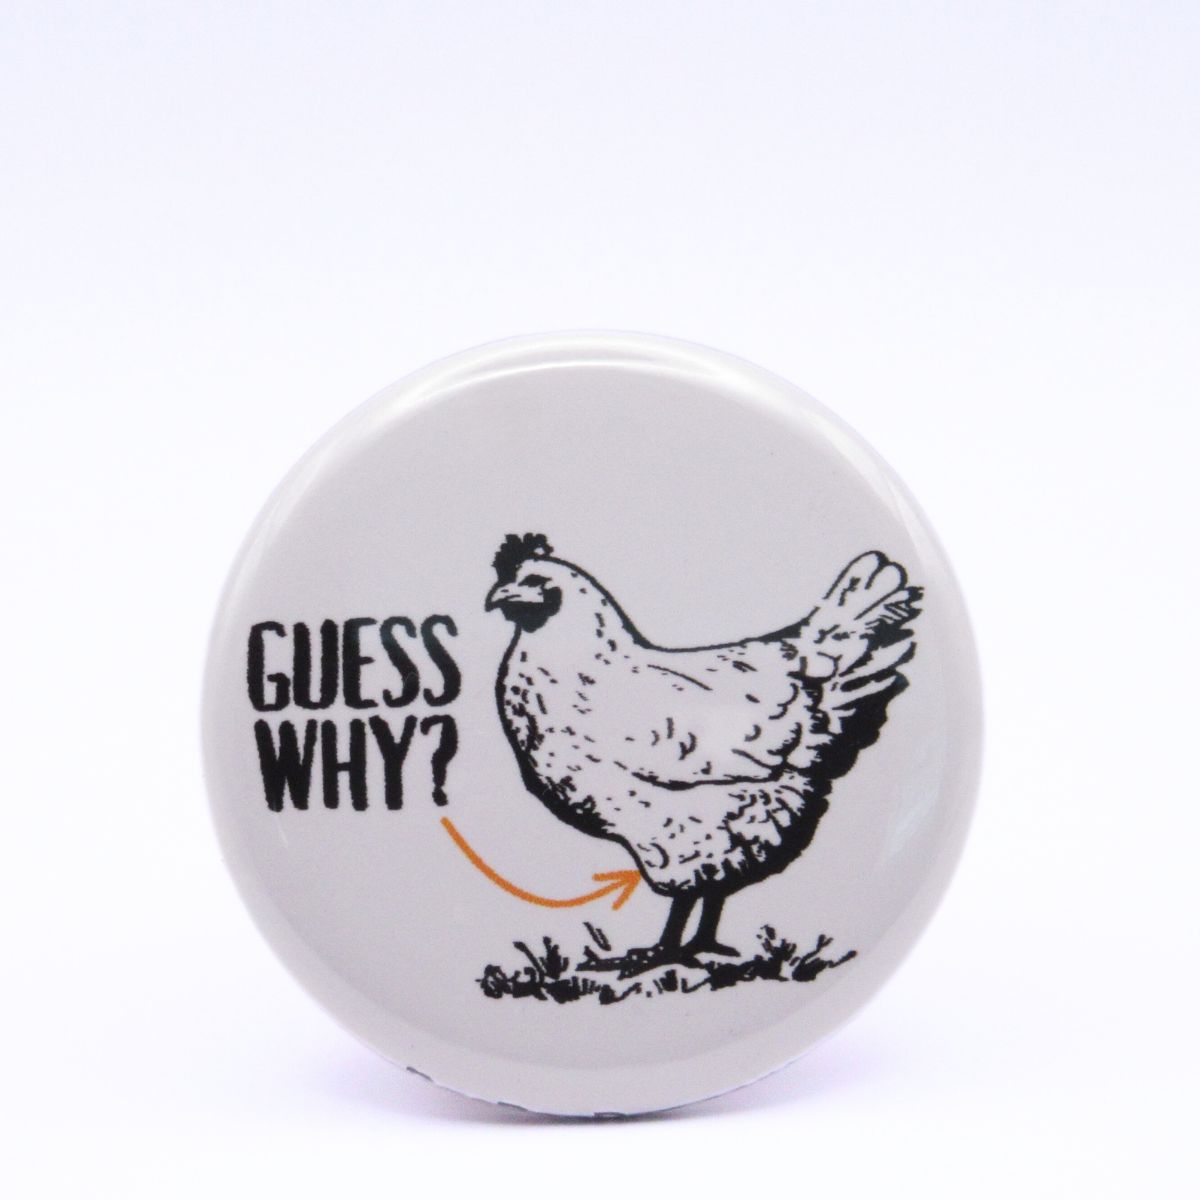 BooBooRoo Pinback Button (i.e. button, badge, pin) displaying a chicken with the words, "Guess Why" and an arrow pointing to the chicken's thigh.